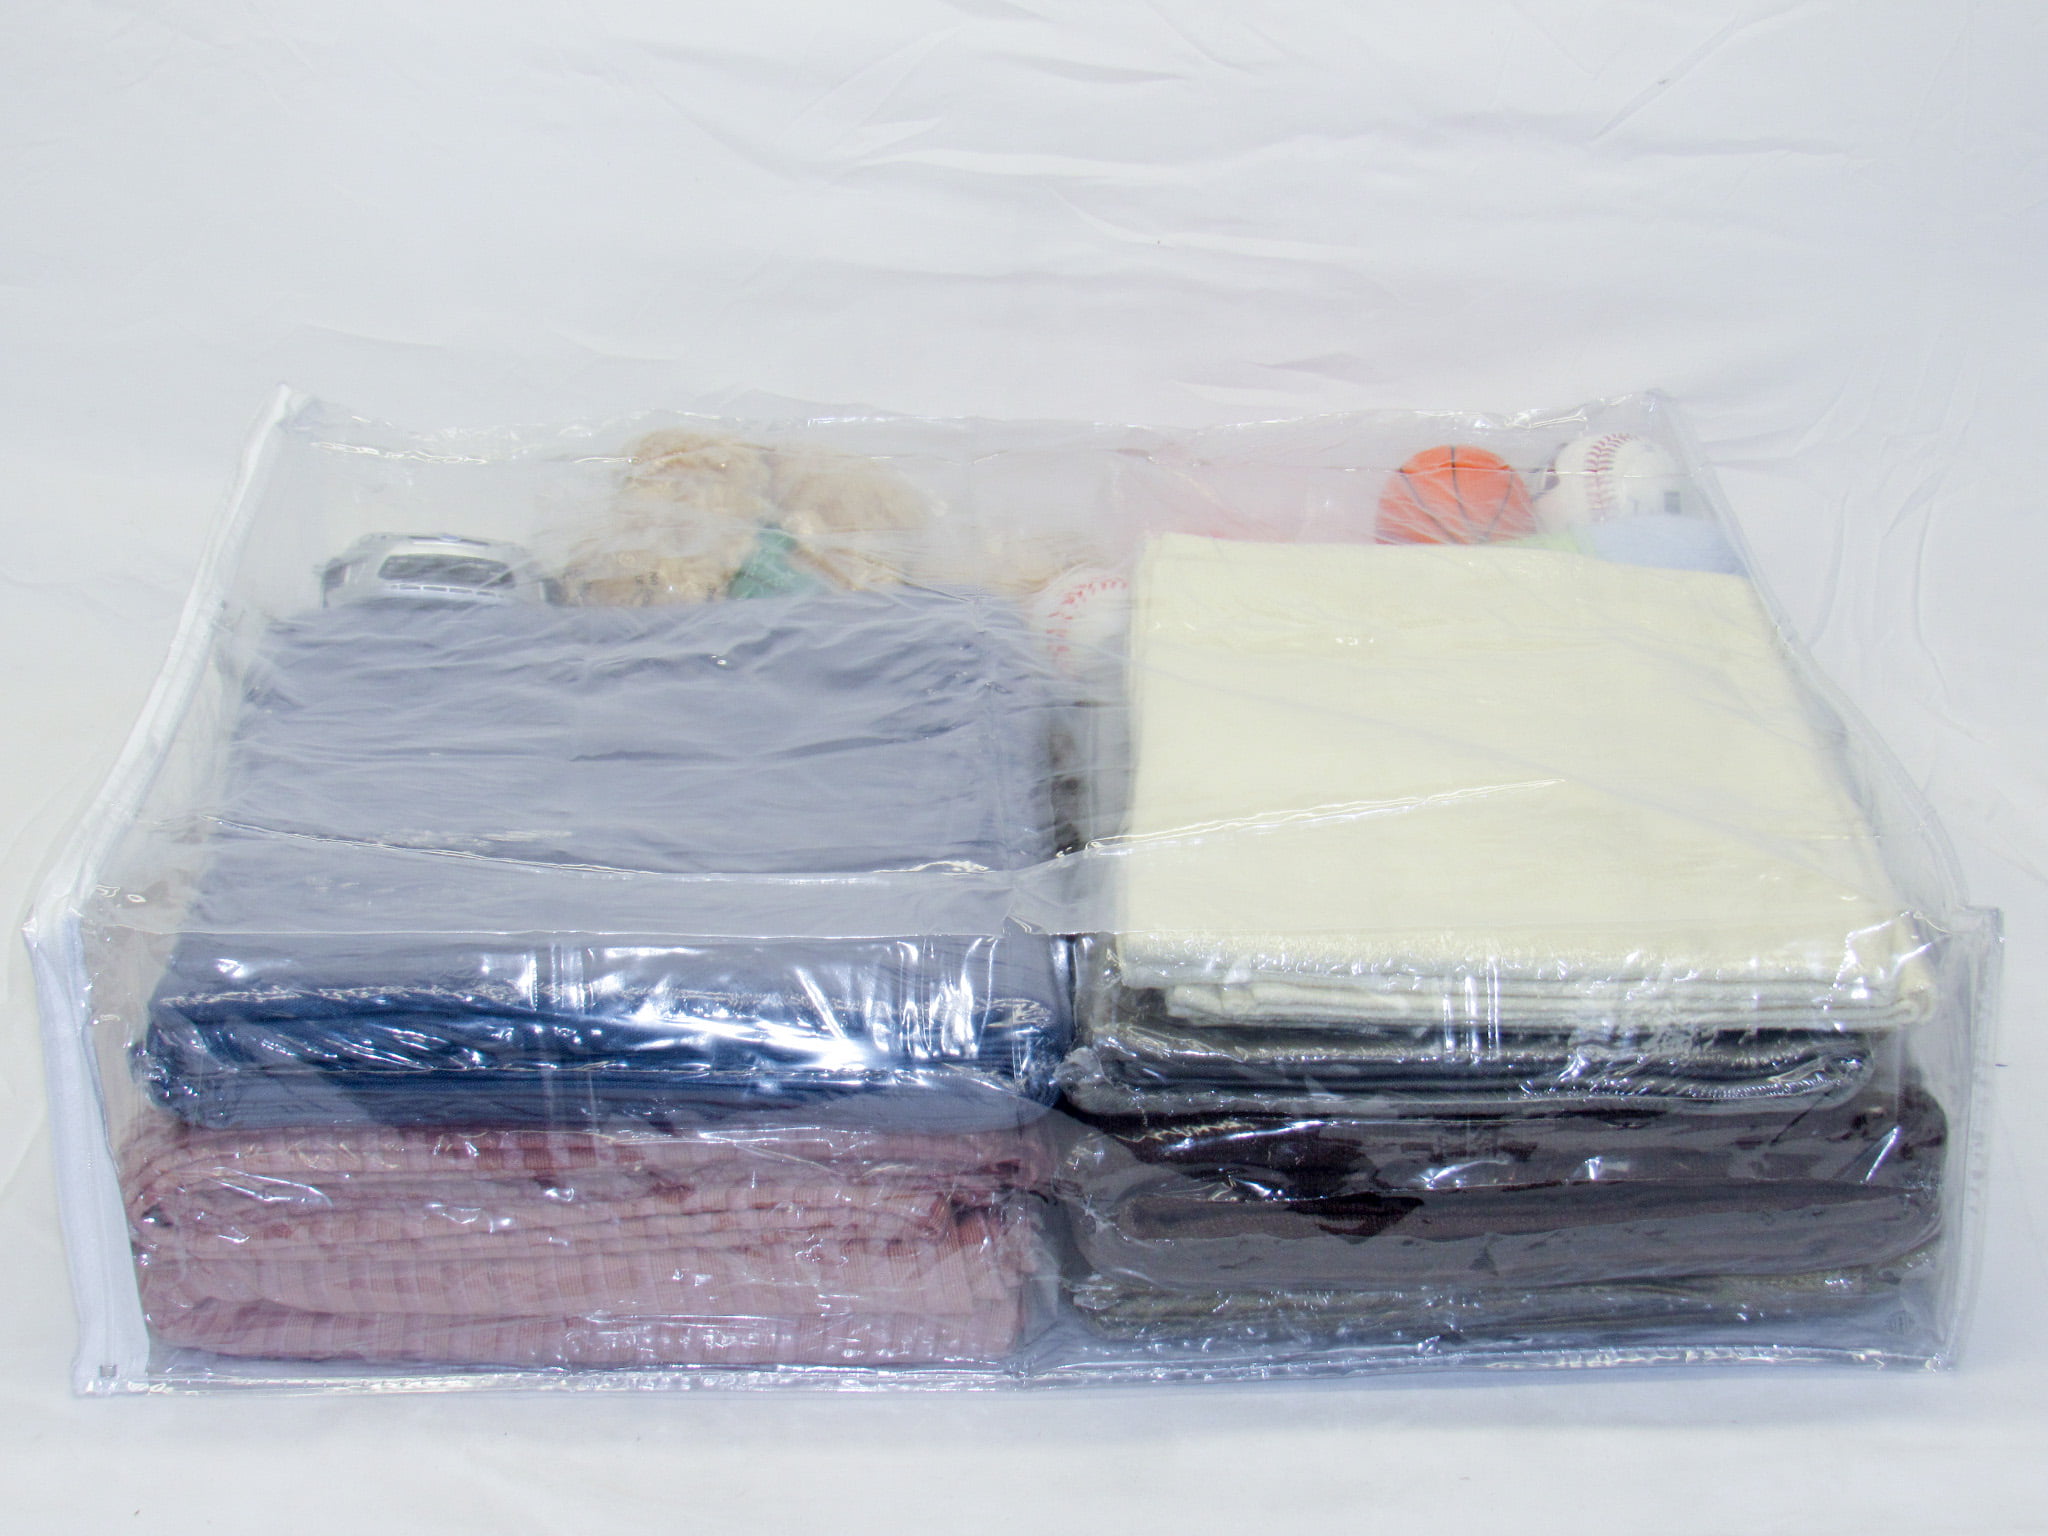 Houseables Plastic Storage Bags, Zipper Case, 25” x 13”, 5 Pack with Bonus,  13.5” x 11”, Clear, Vinyl, Moth Proof, for Blanket, Linen, Sweater, Bed